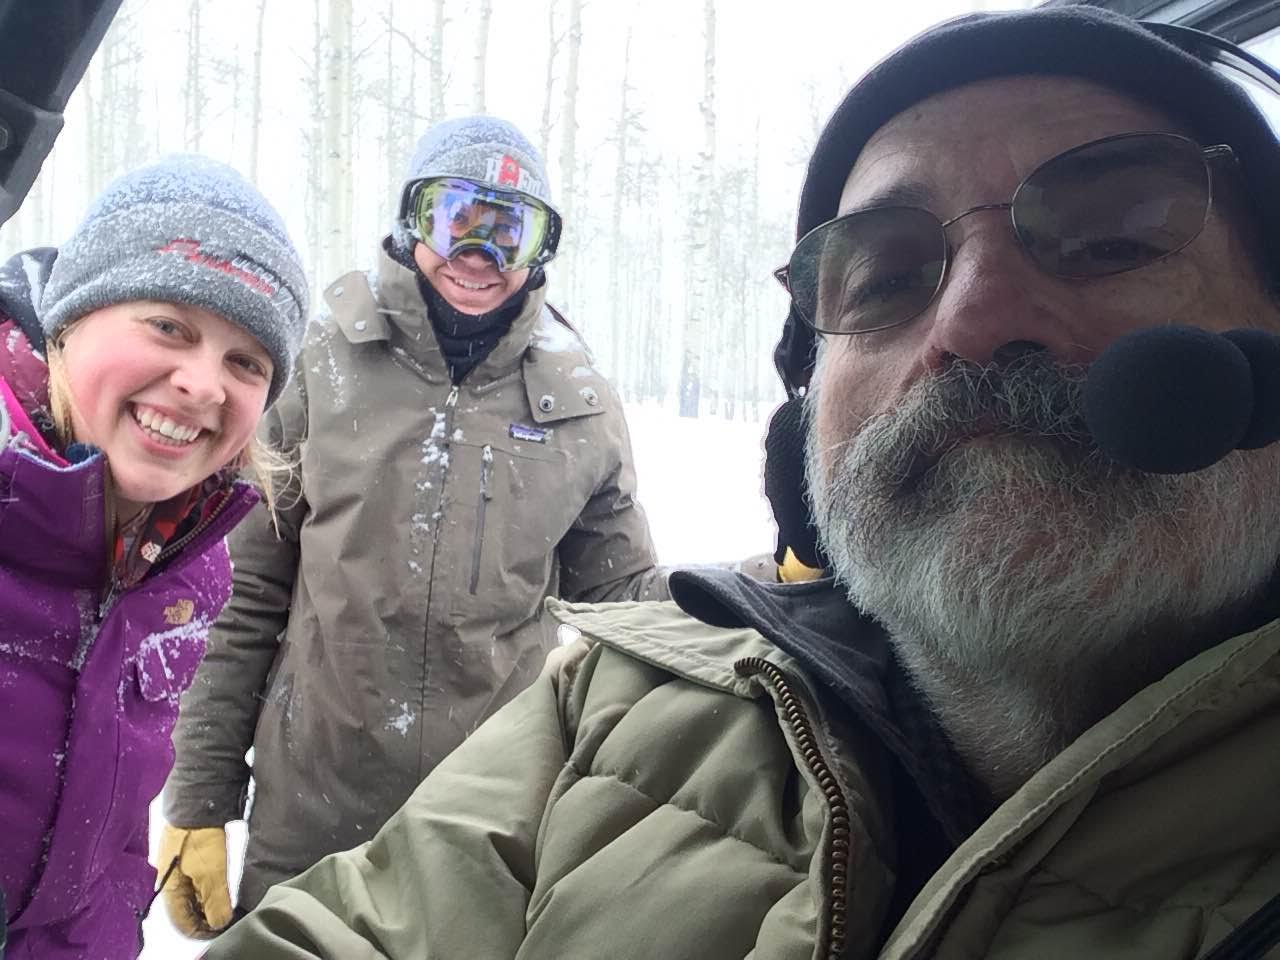 Kyra Westman, Mitchell Gebhard, and Mark Ulano. 'The Hateful Eight' filming on location outside of Telluride, Colorado.